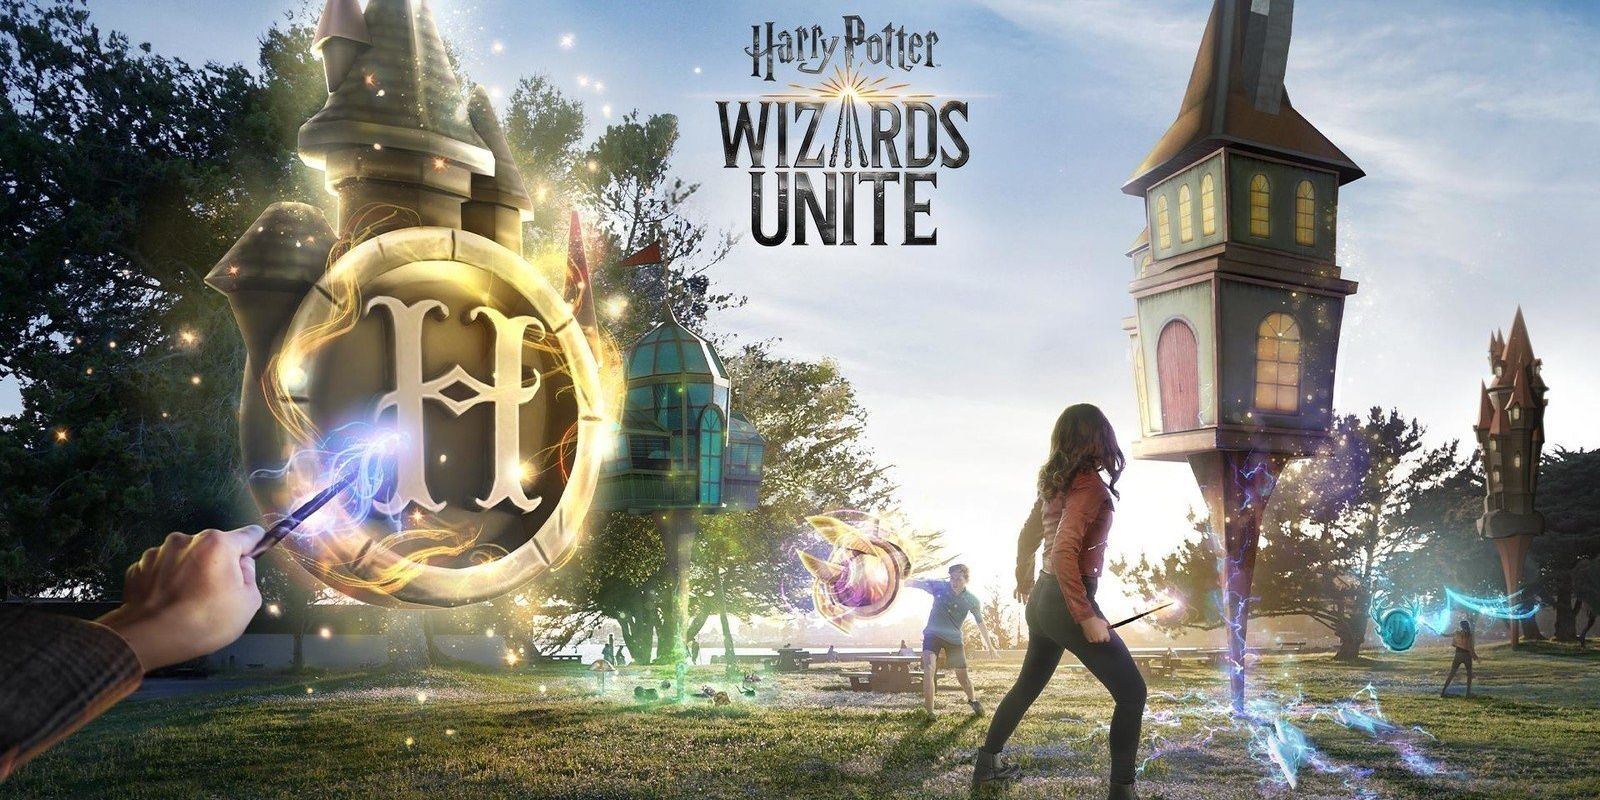 Wizards Unite promo image of players